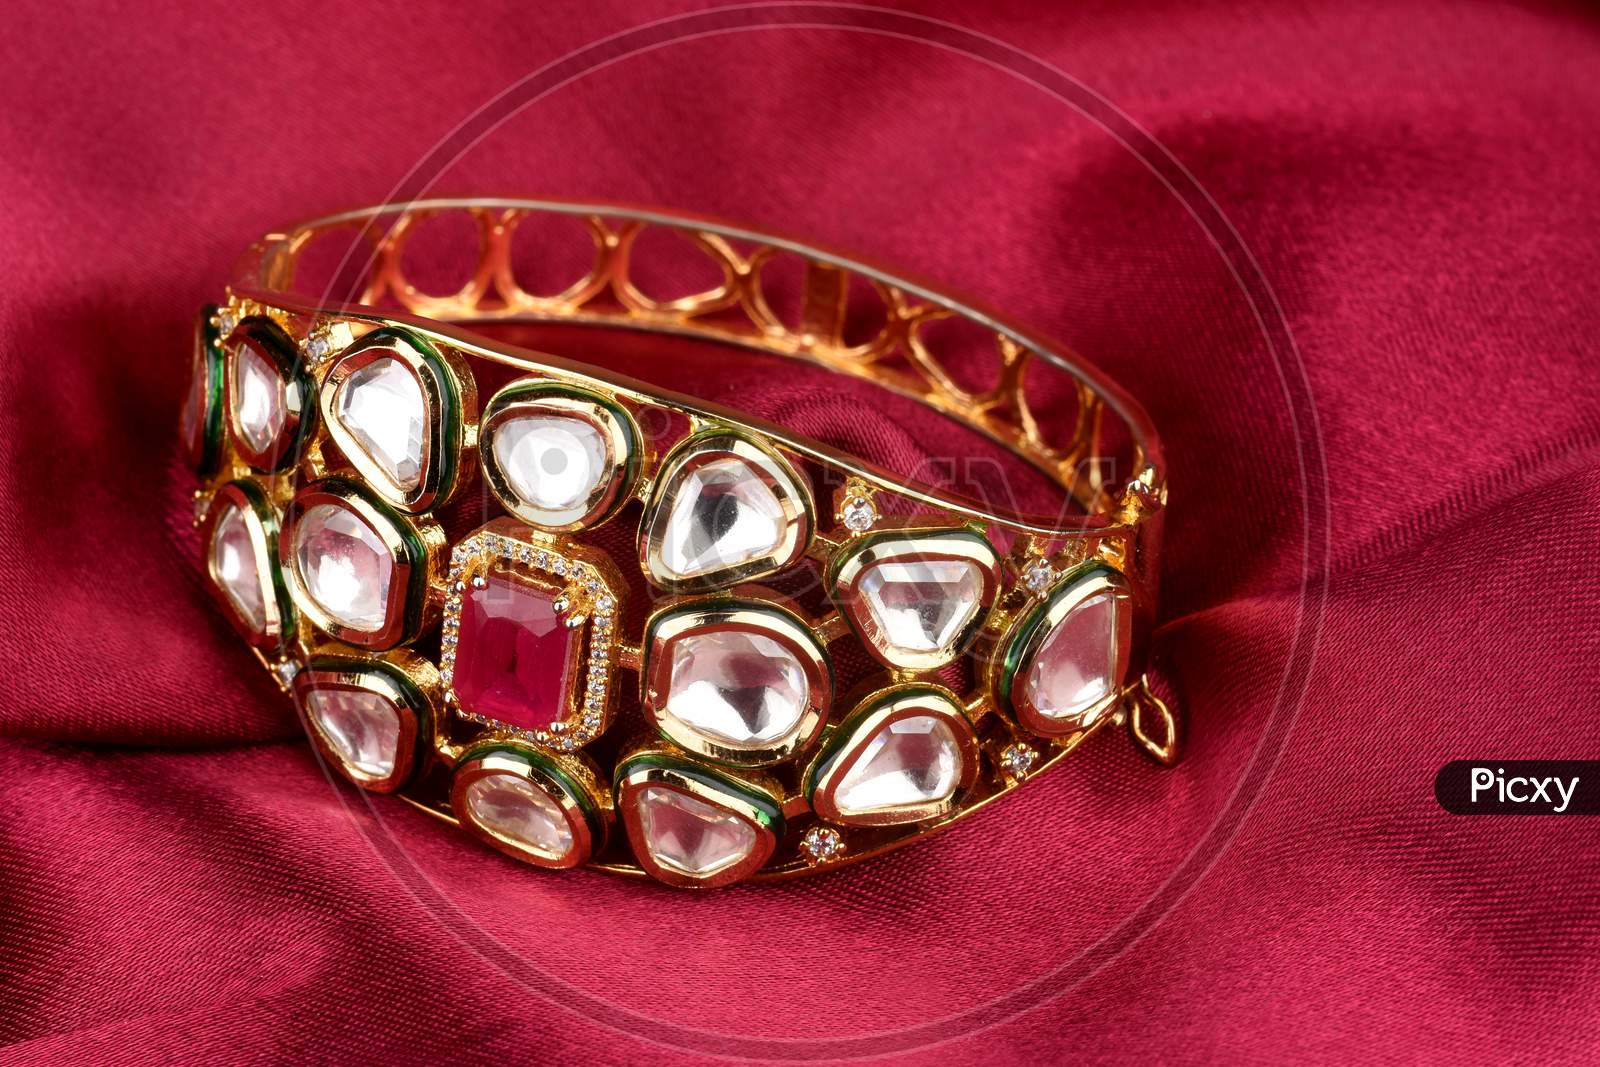 Gold Bracelet On  A Red Satin Background. Kundan Bracelet,Style, Fashion And Design Of Jewelry. Indian Traditional Jewellery,Indian Wedding Jewellery